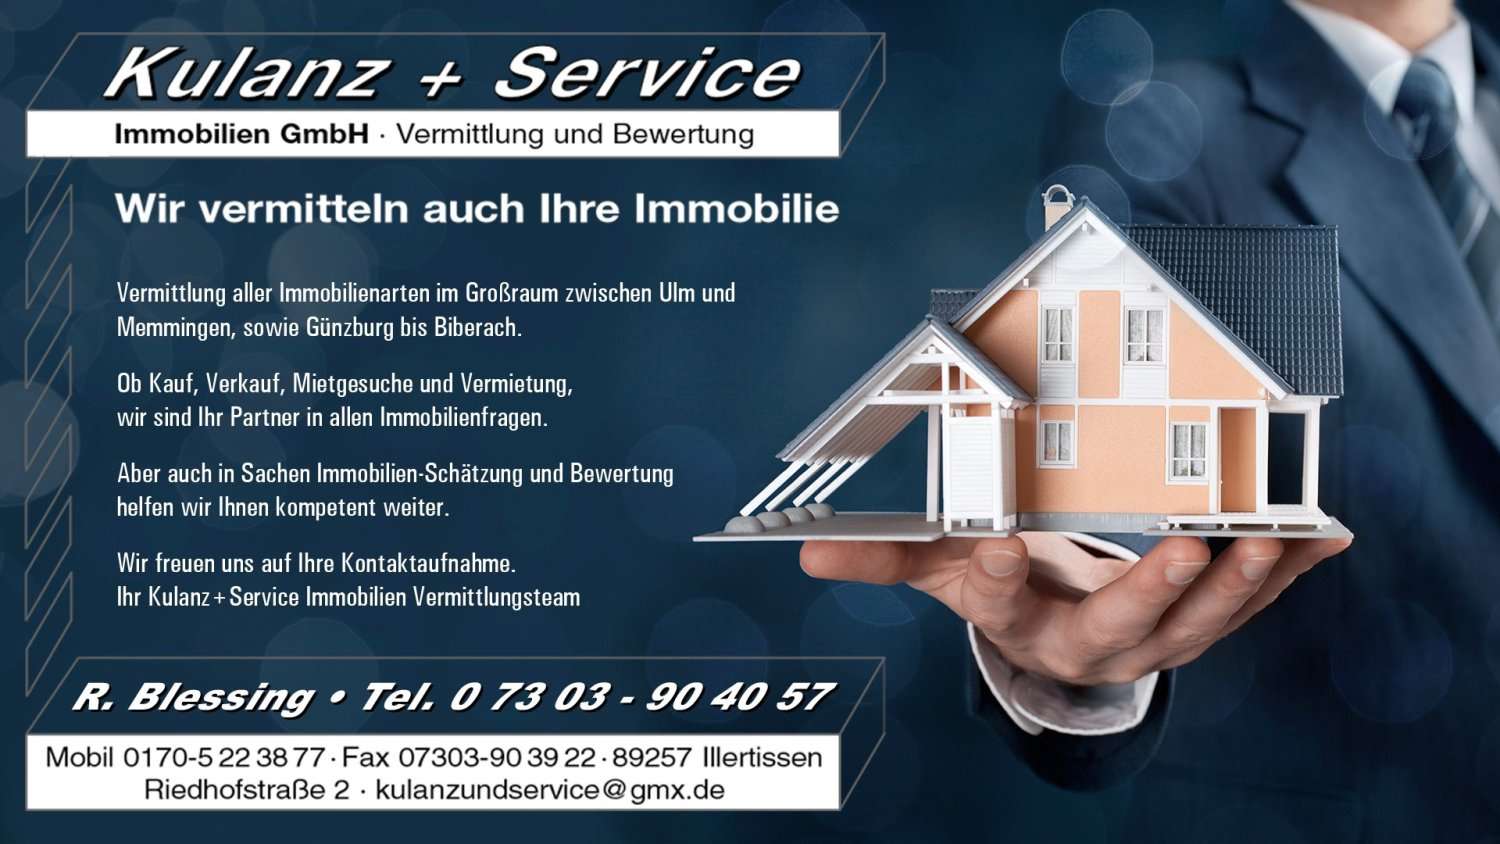 Kulanz Service Immobilien Gmbh Hr Blessing Immobilienmakler Bei Immobilienscout24